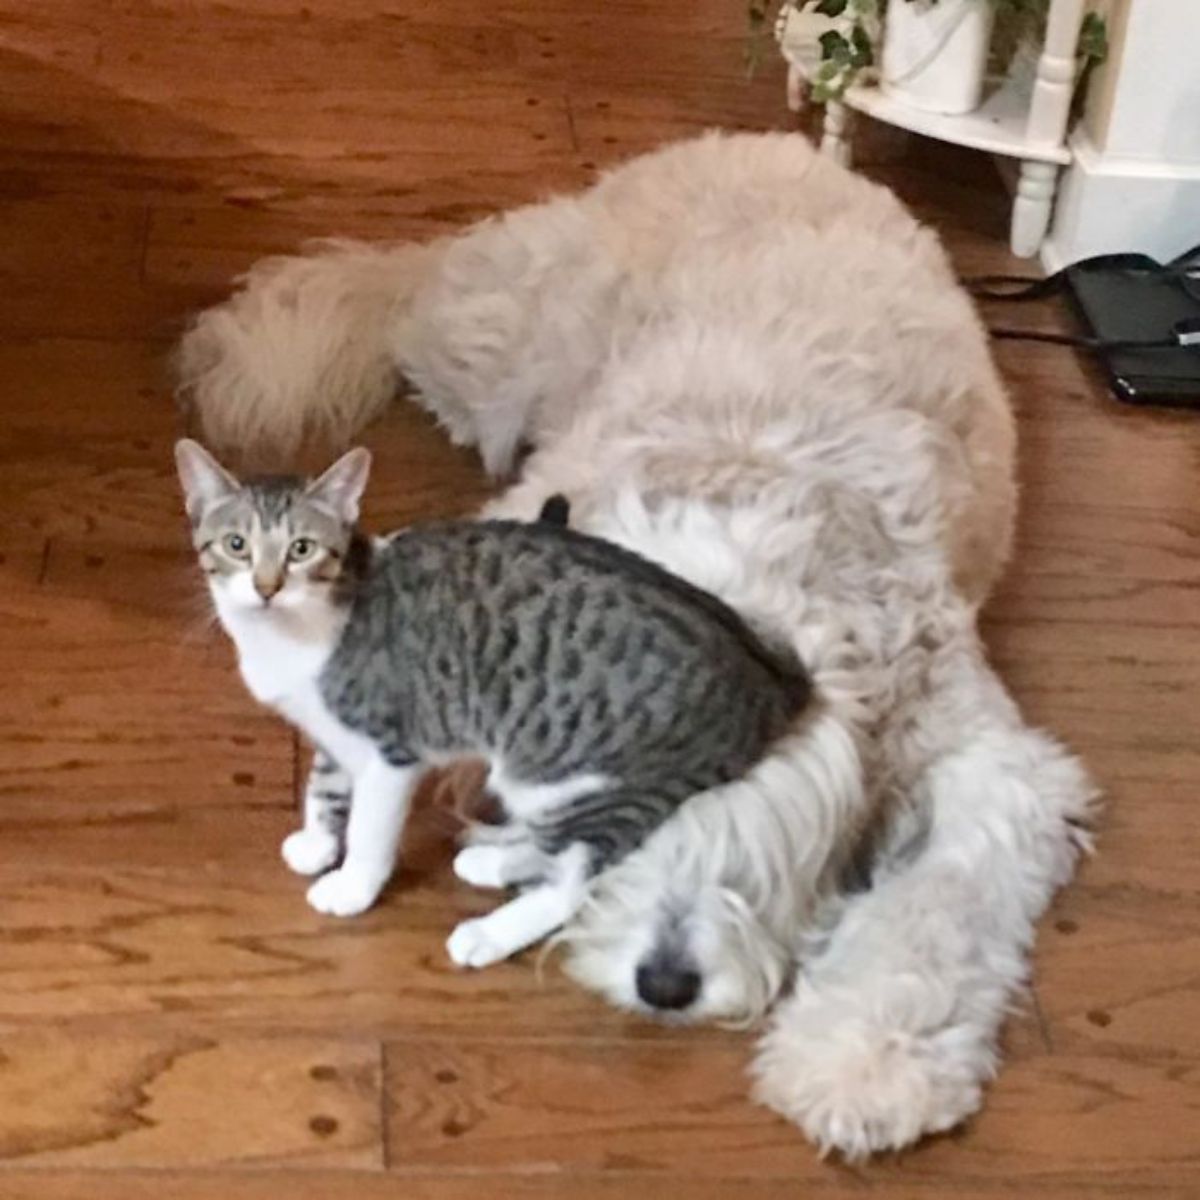 grey and white cat sitting on a fluffy white dog's head